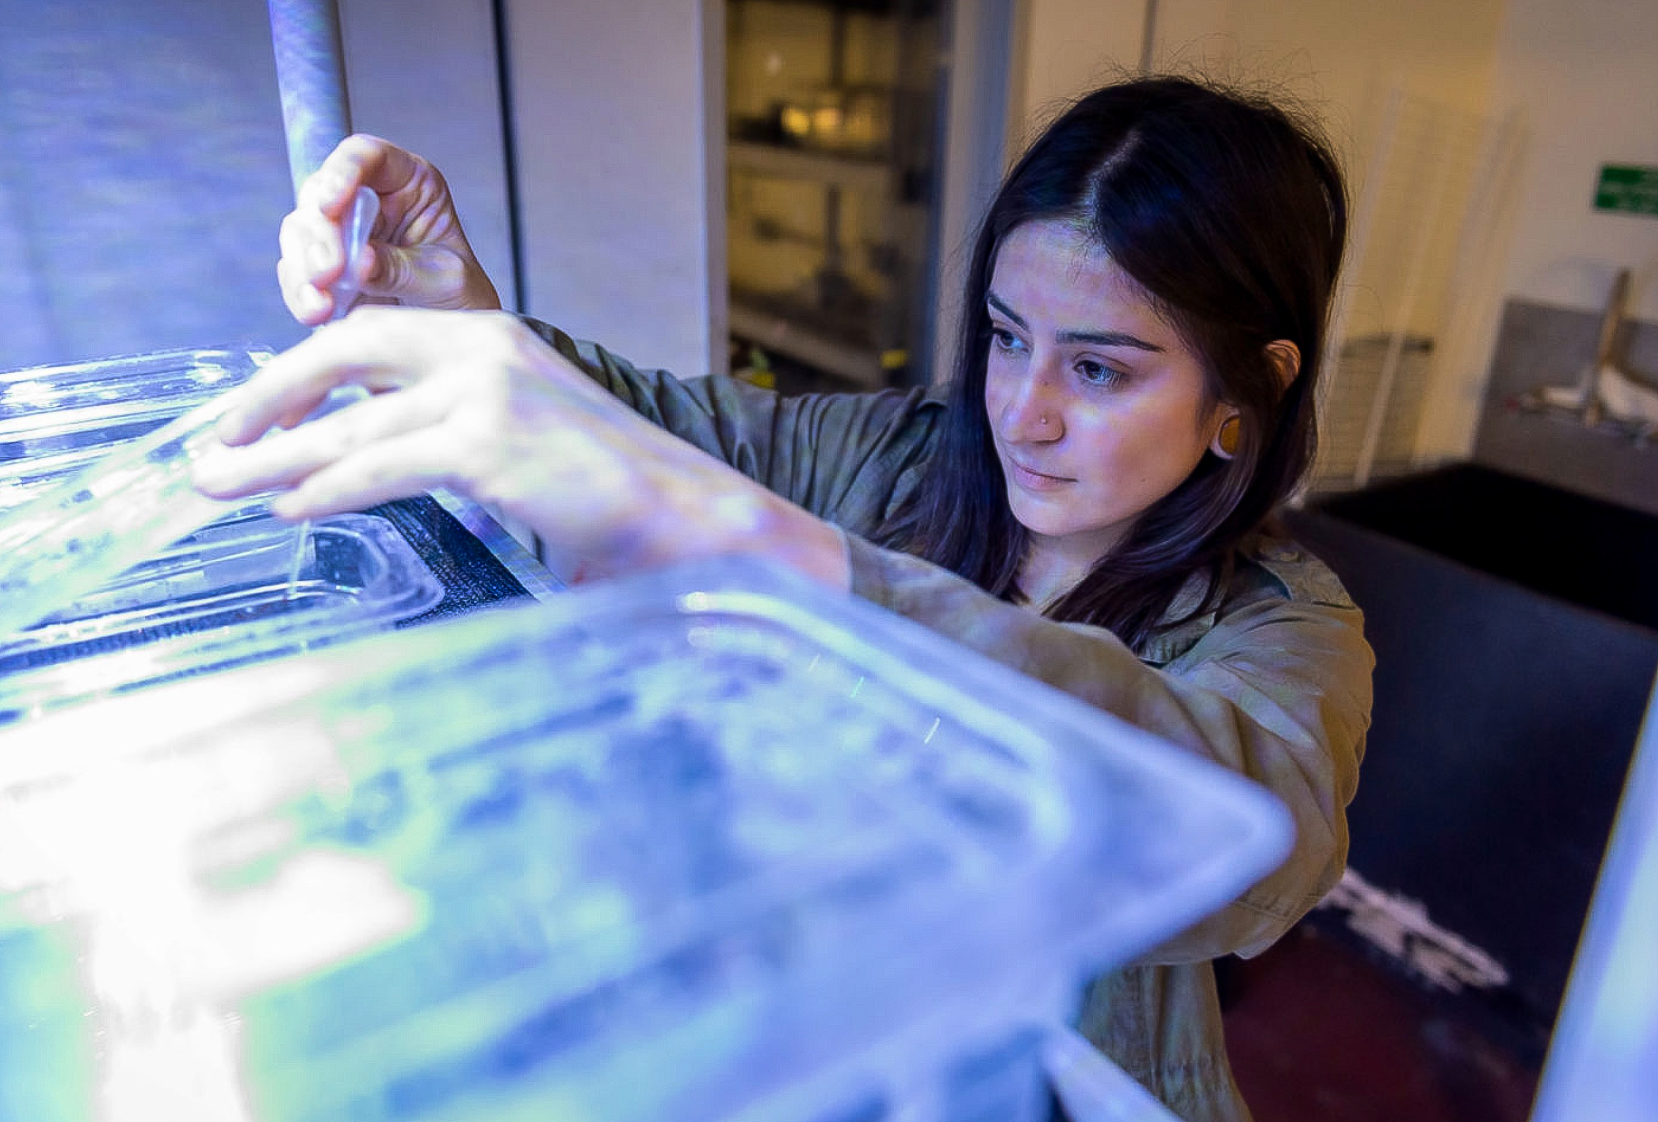 Environmental Studies student Connie Machuca uses a pipette to feed sea anemones in a specimen tank